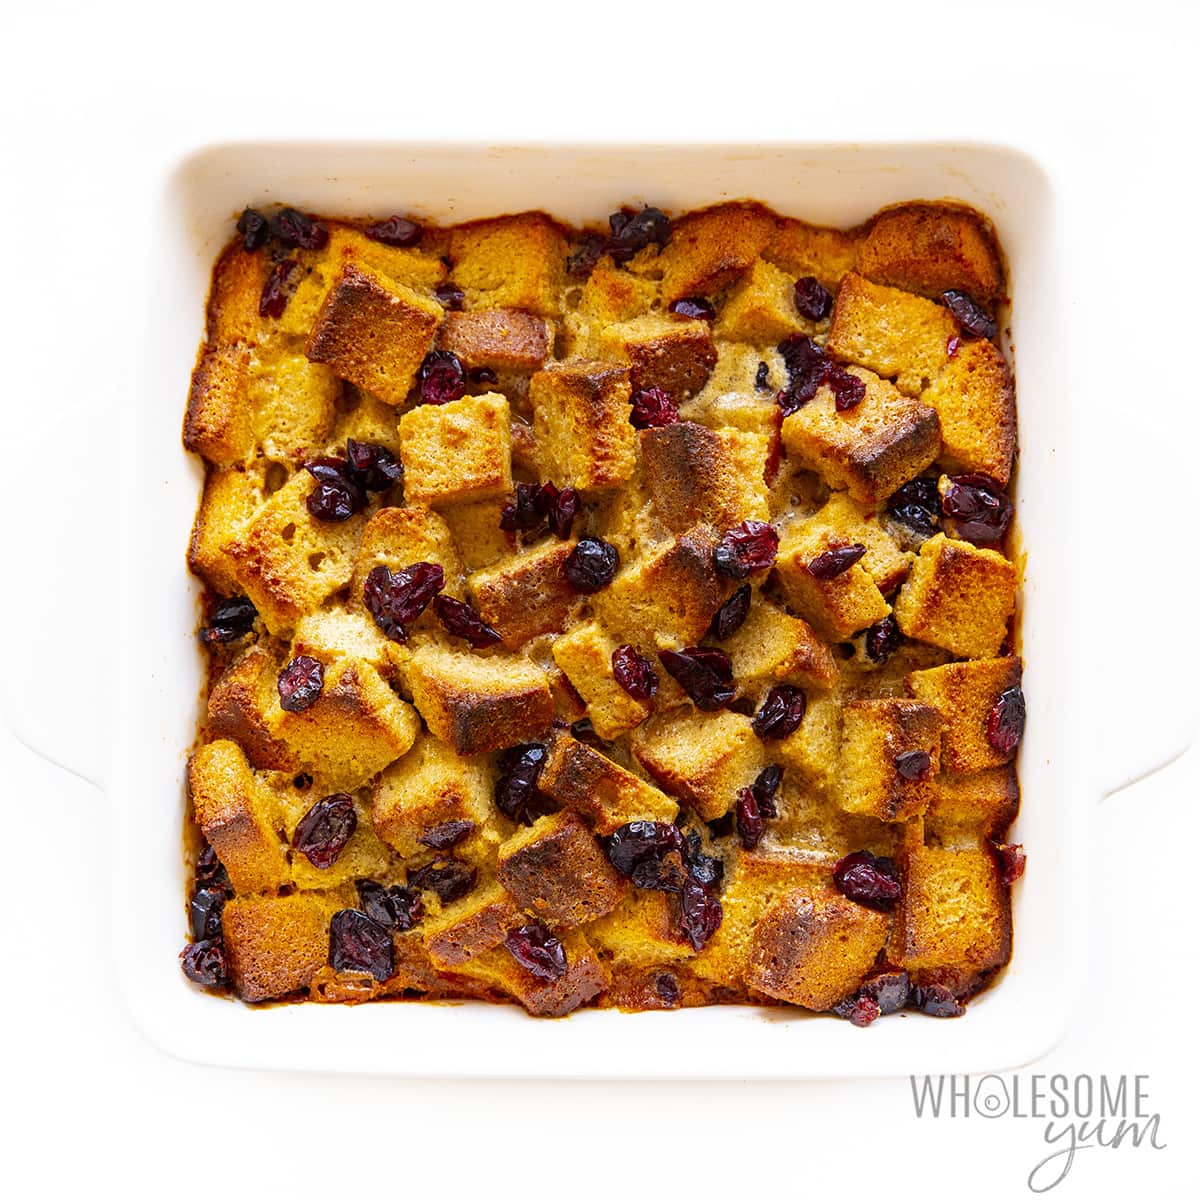 Fully baked sugar-free bread pudding in a baking pan.